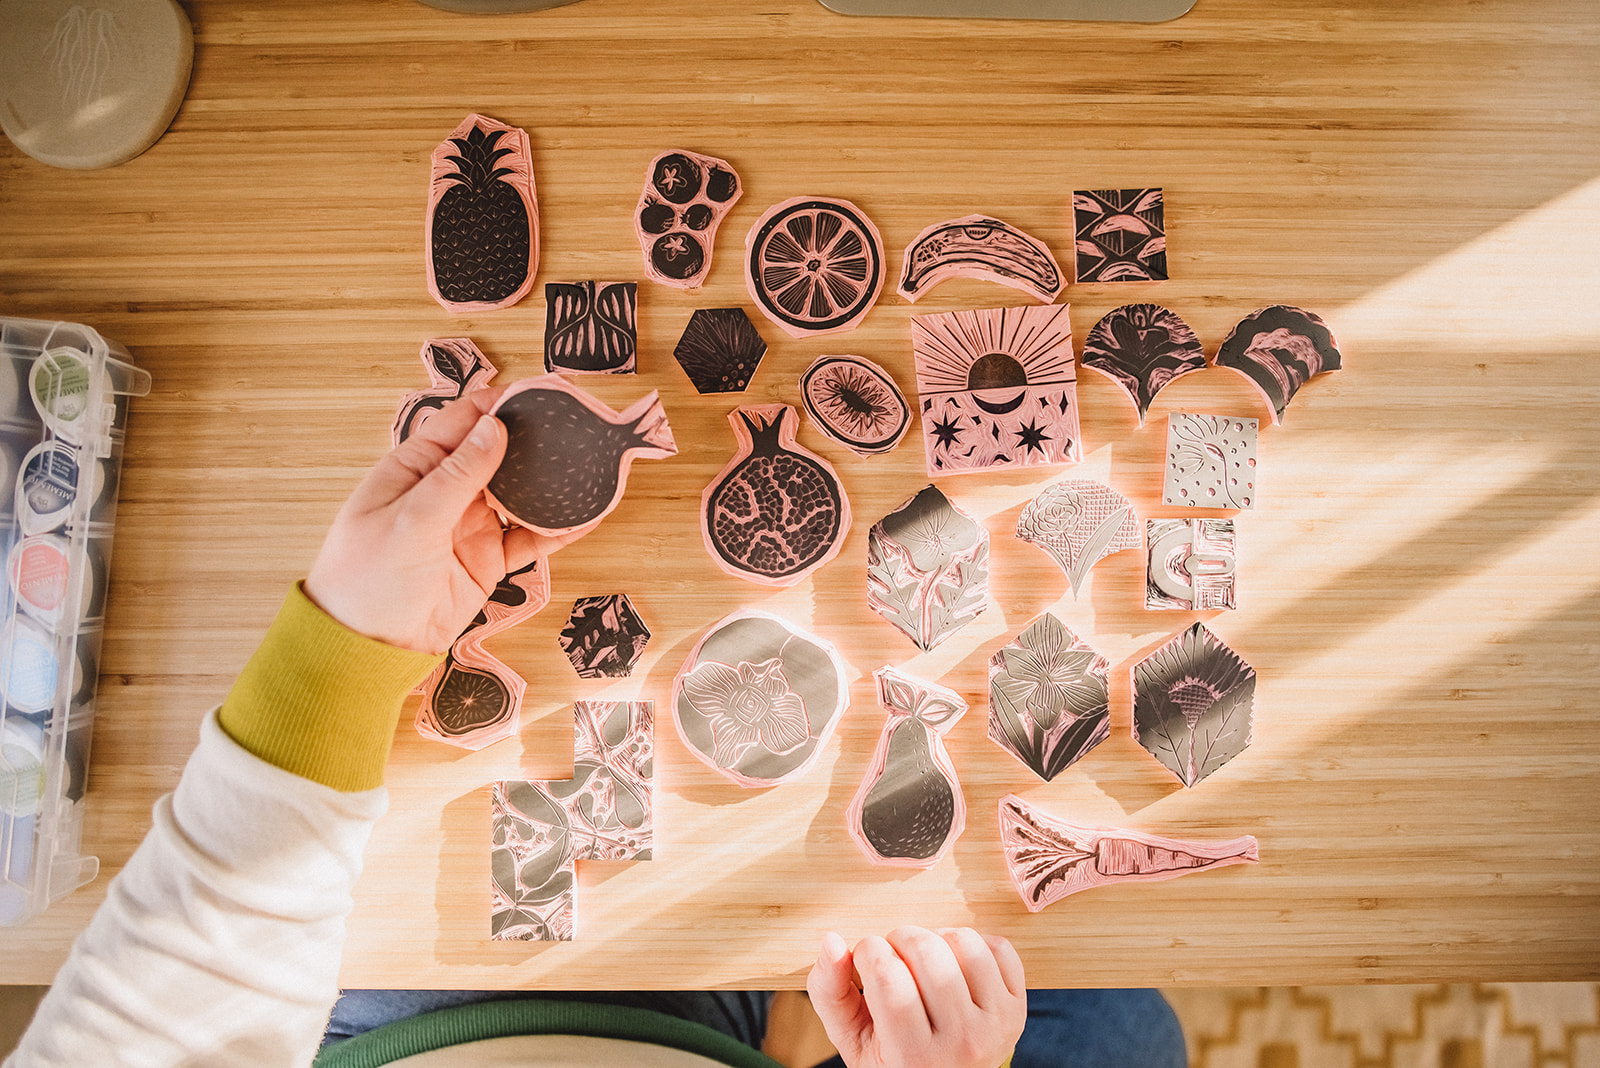 block printing blocks with a variety of shapes and forms